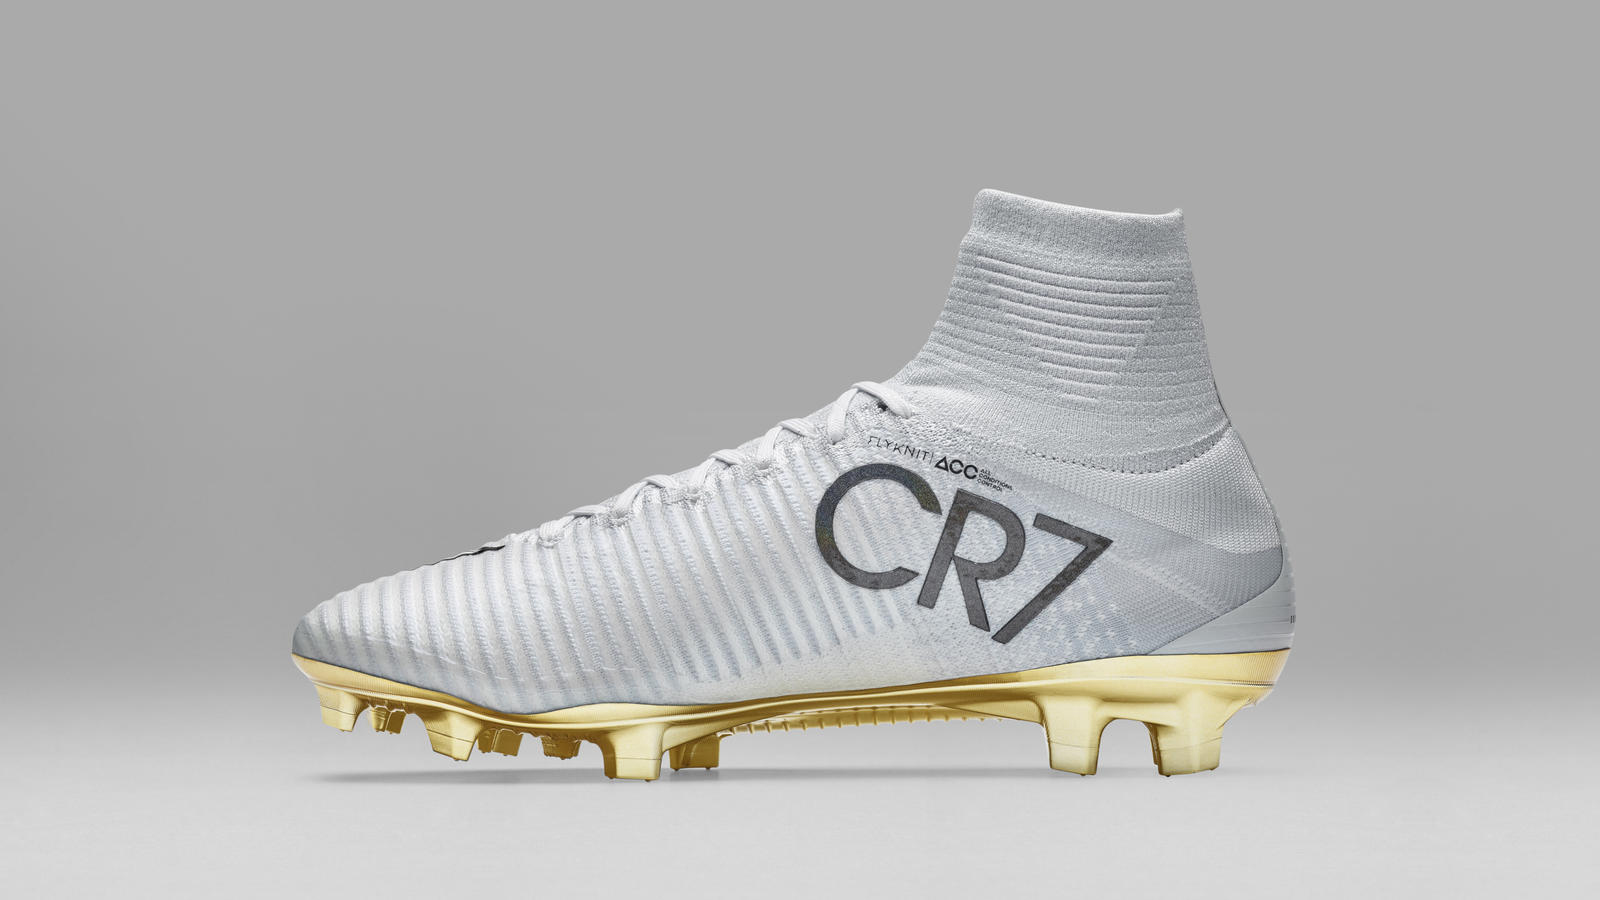 GOING GOLD: NIKE MERCURIAL SUPERFLY CR7 